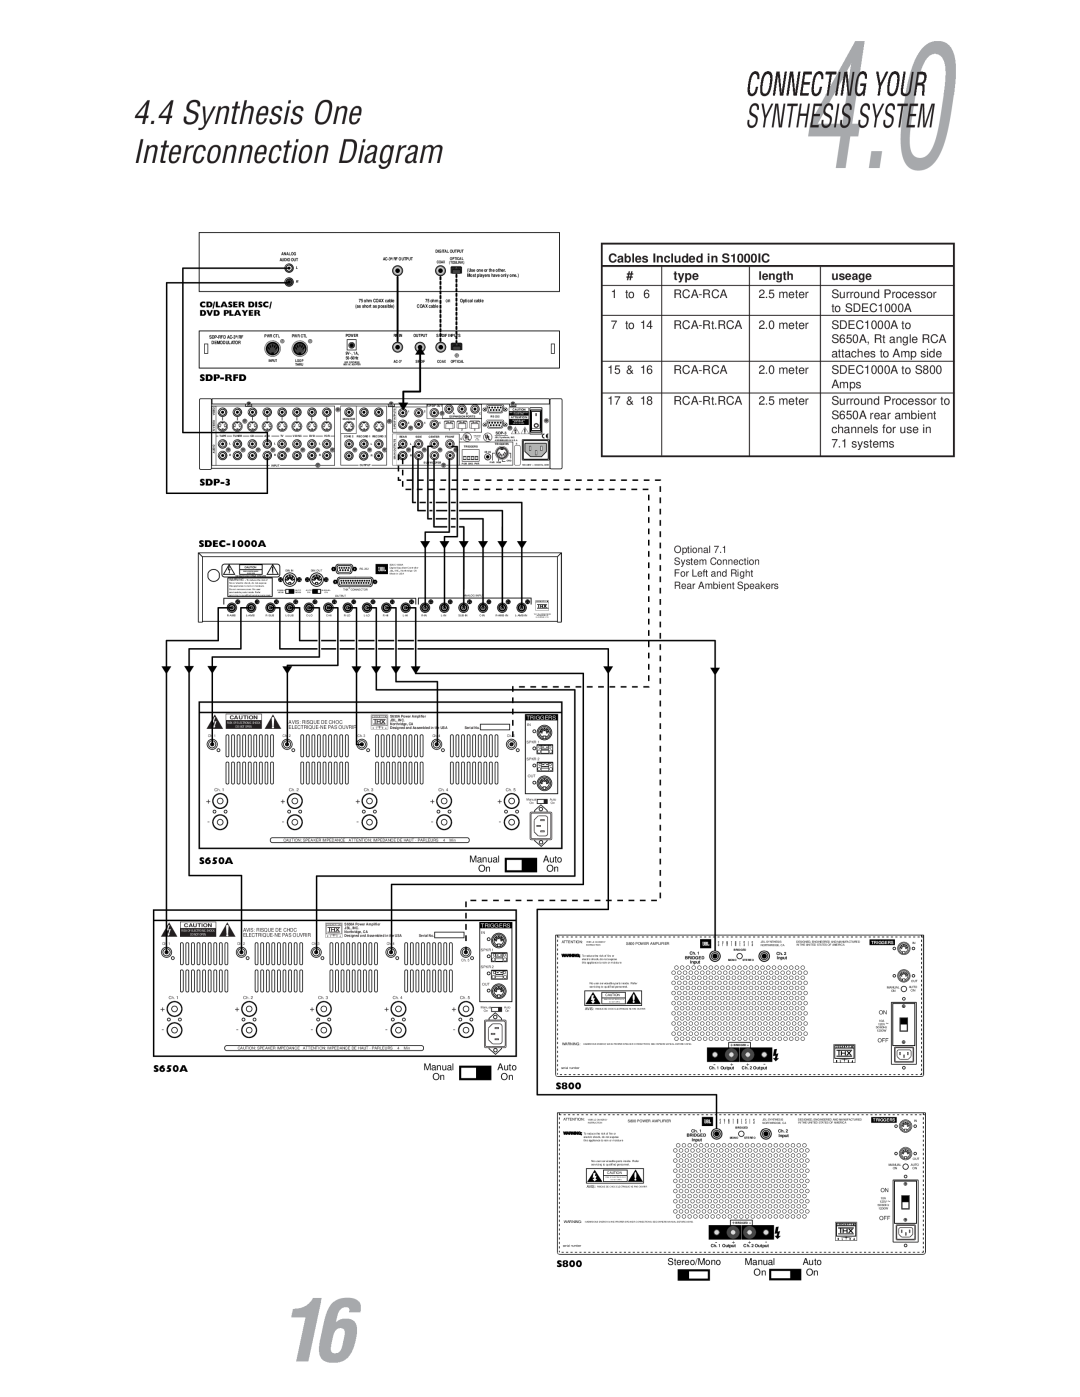 JBL S800 4.4Synthesis One Interconnection Diagram, Synthesis System, CONNECTING4.YOUR0, Cables Included in S1000IC, type 